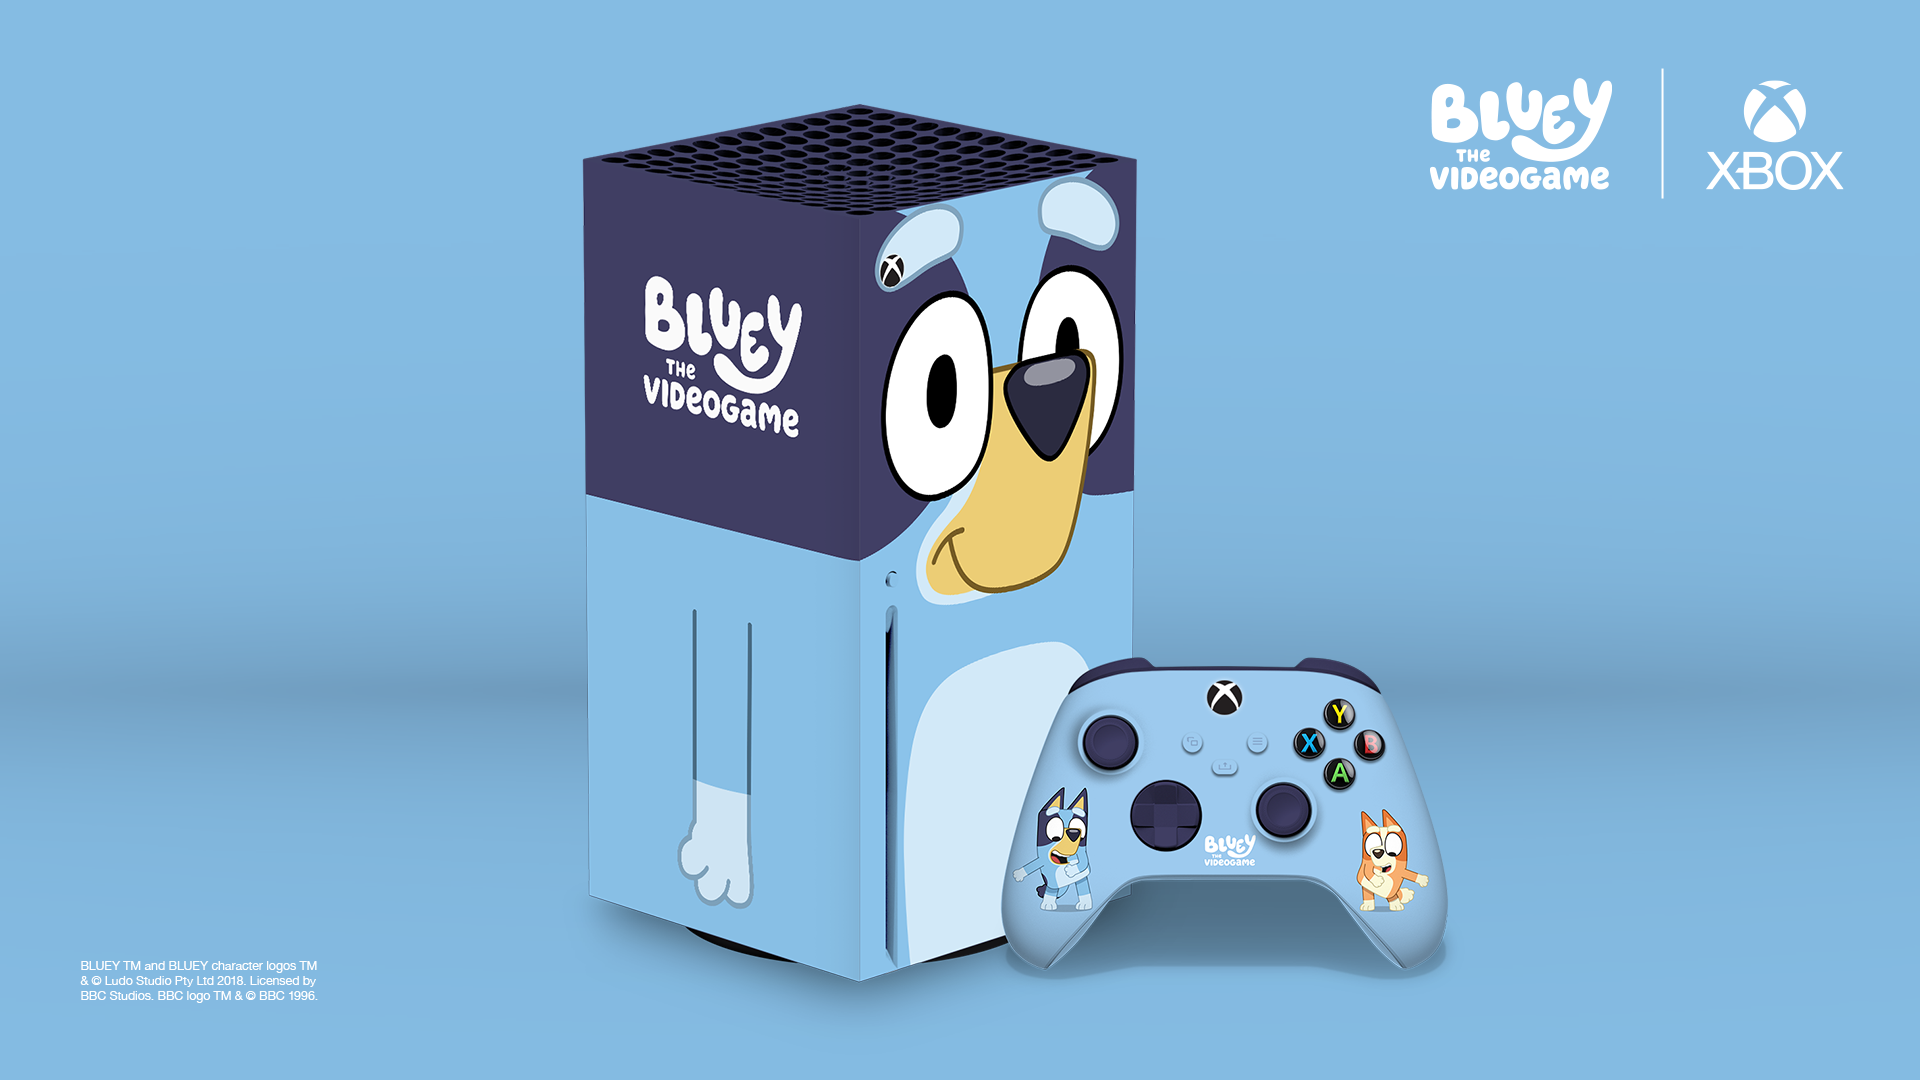 This Bluey Custom Xbox Series X can be yours, if you're lucky